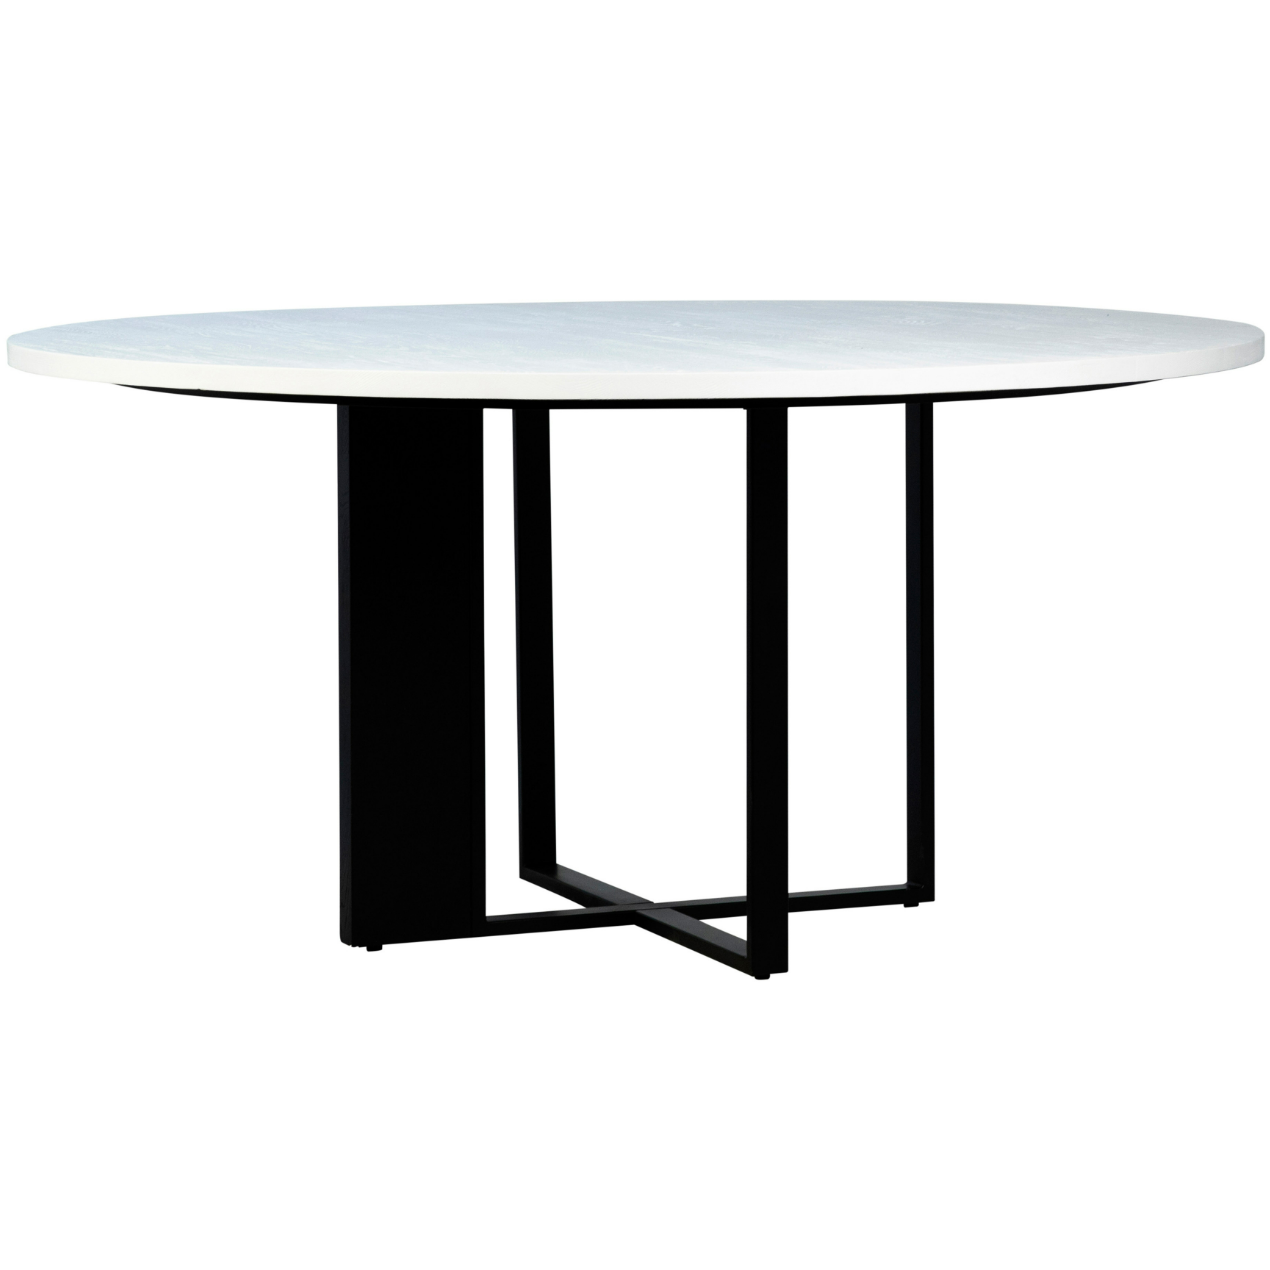 Load image into Gallery viewer, Hizon Dining Table Dining Tables Dovetail     Four Hands, Mid Century Modern Furniture, Old Bones Furniture Company, Old Bones Co, Modern Mid Century, Designer Furniture, https://www.oldbonesco.com/
